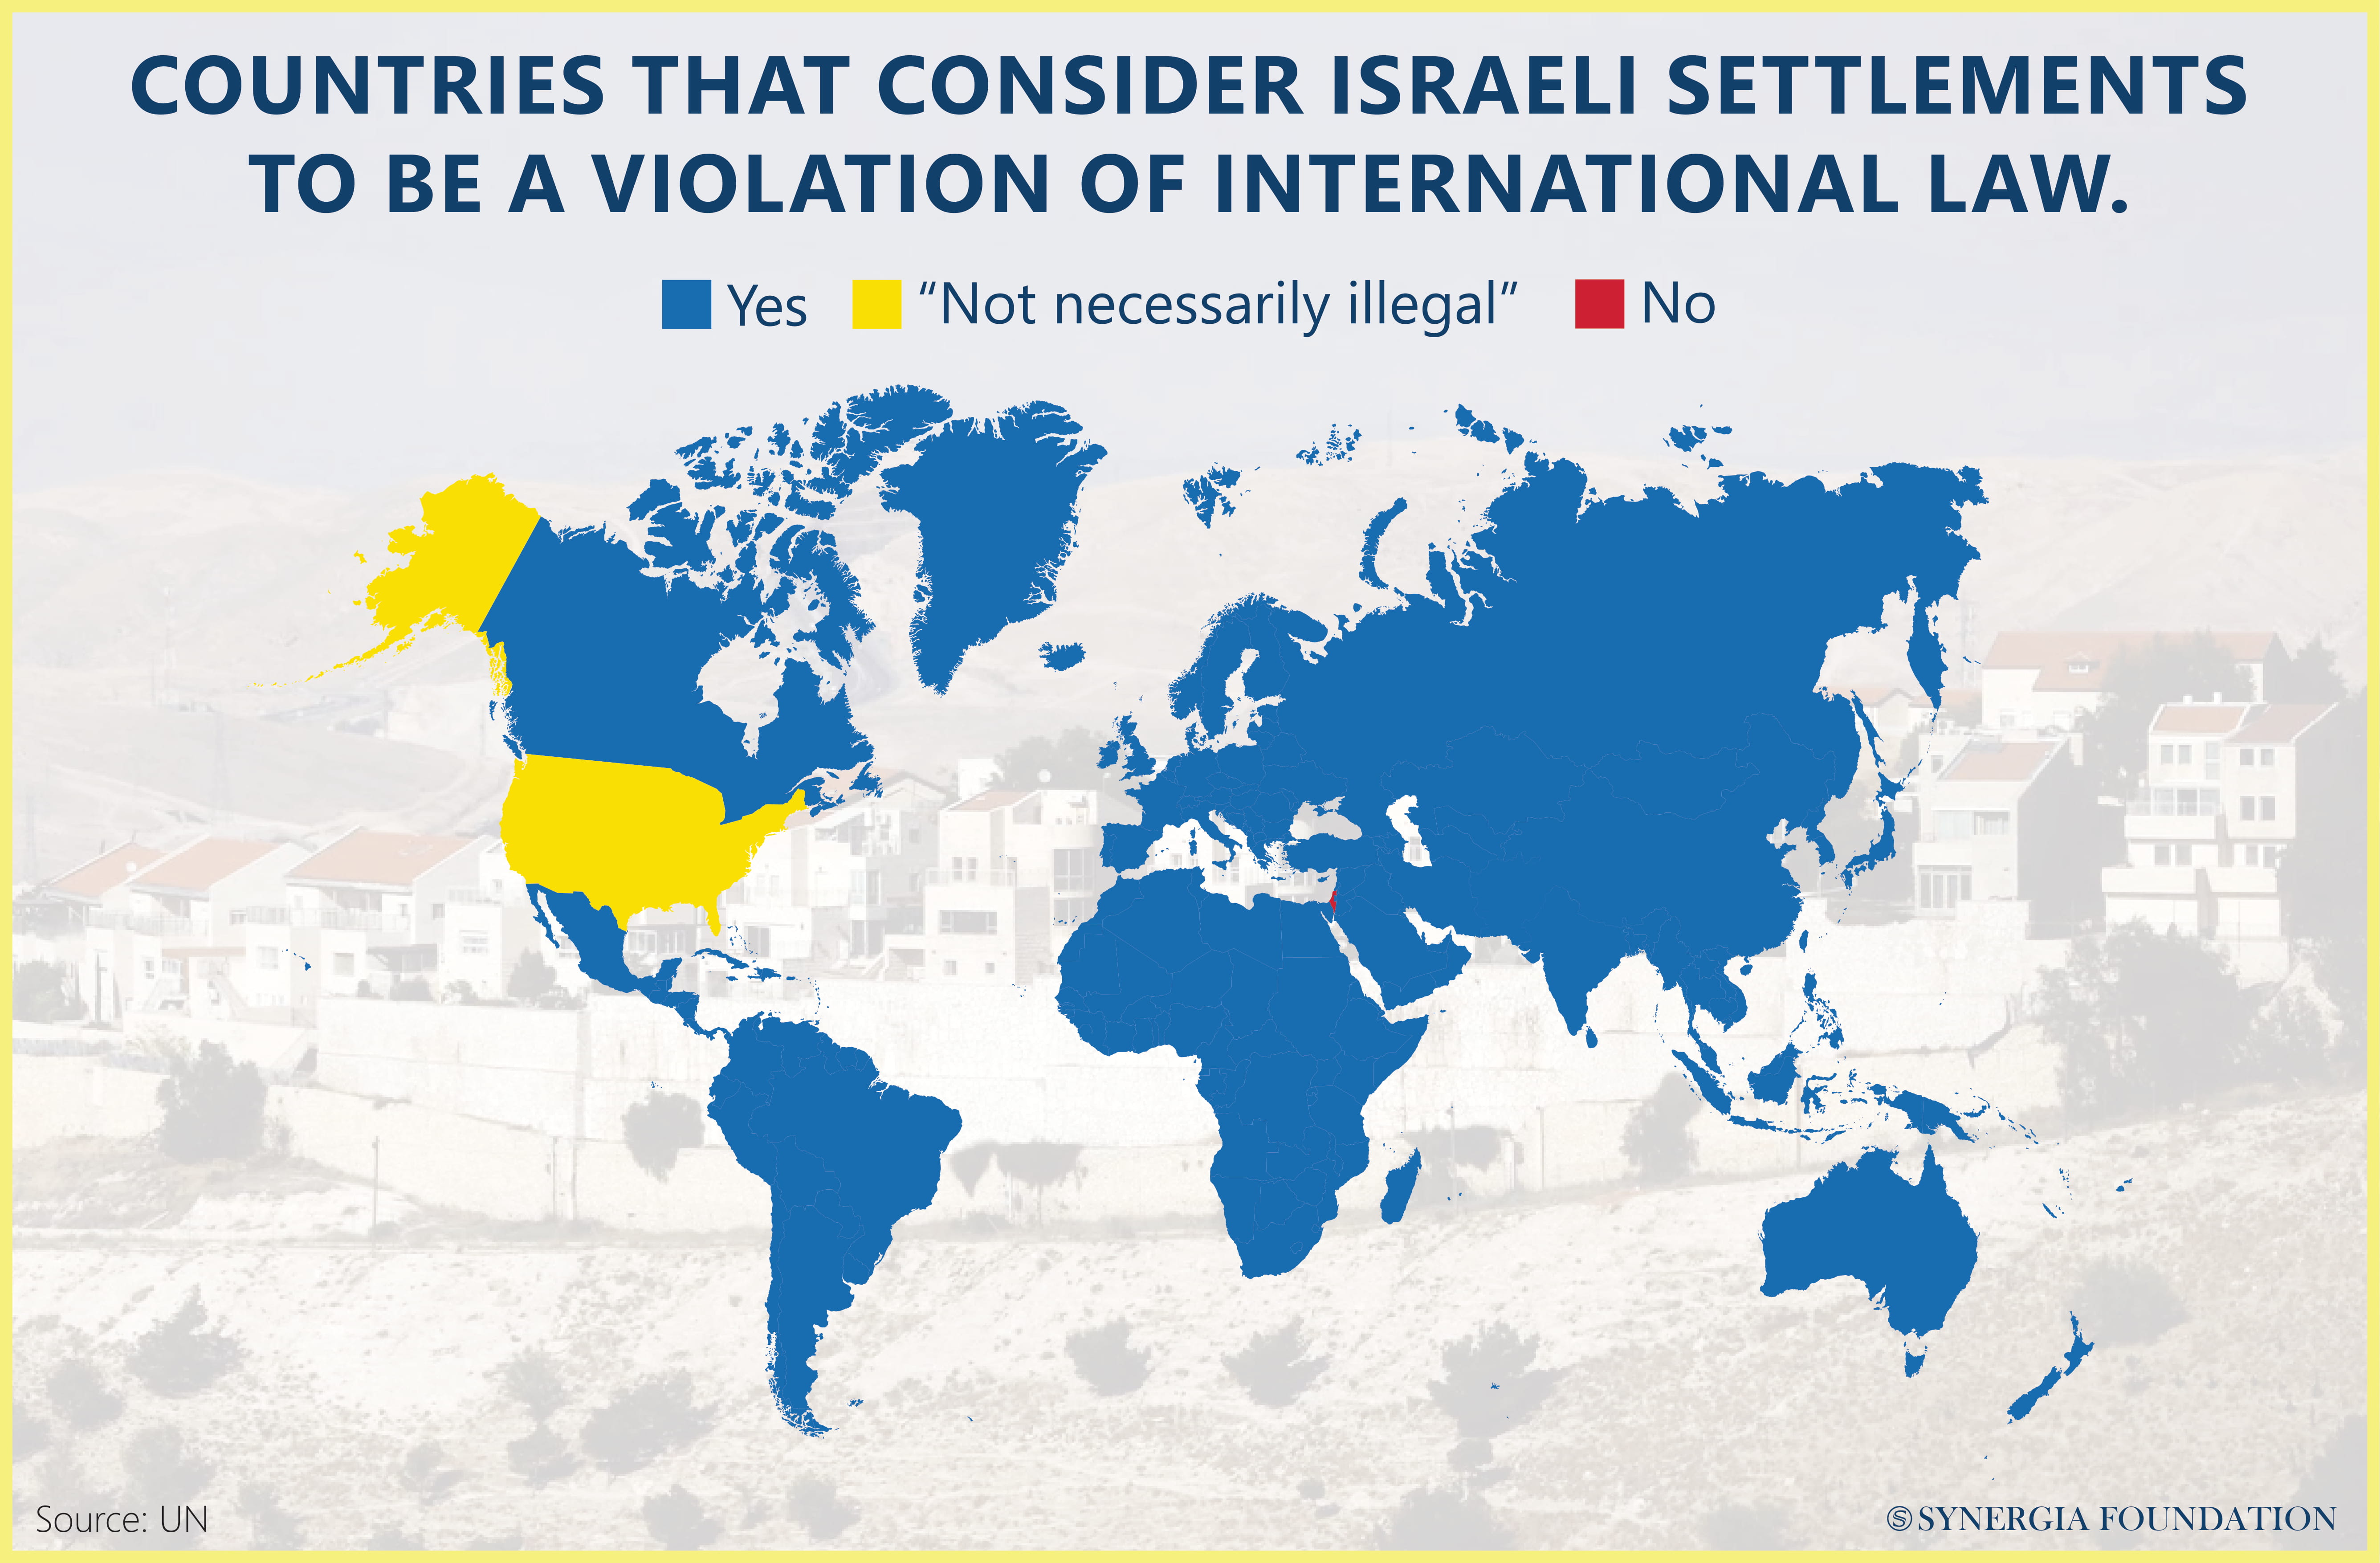 Global recognition of Israel's occupation 